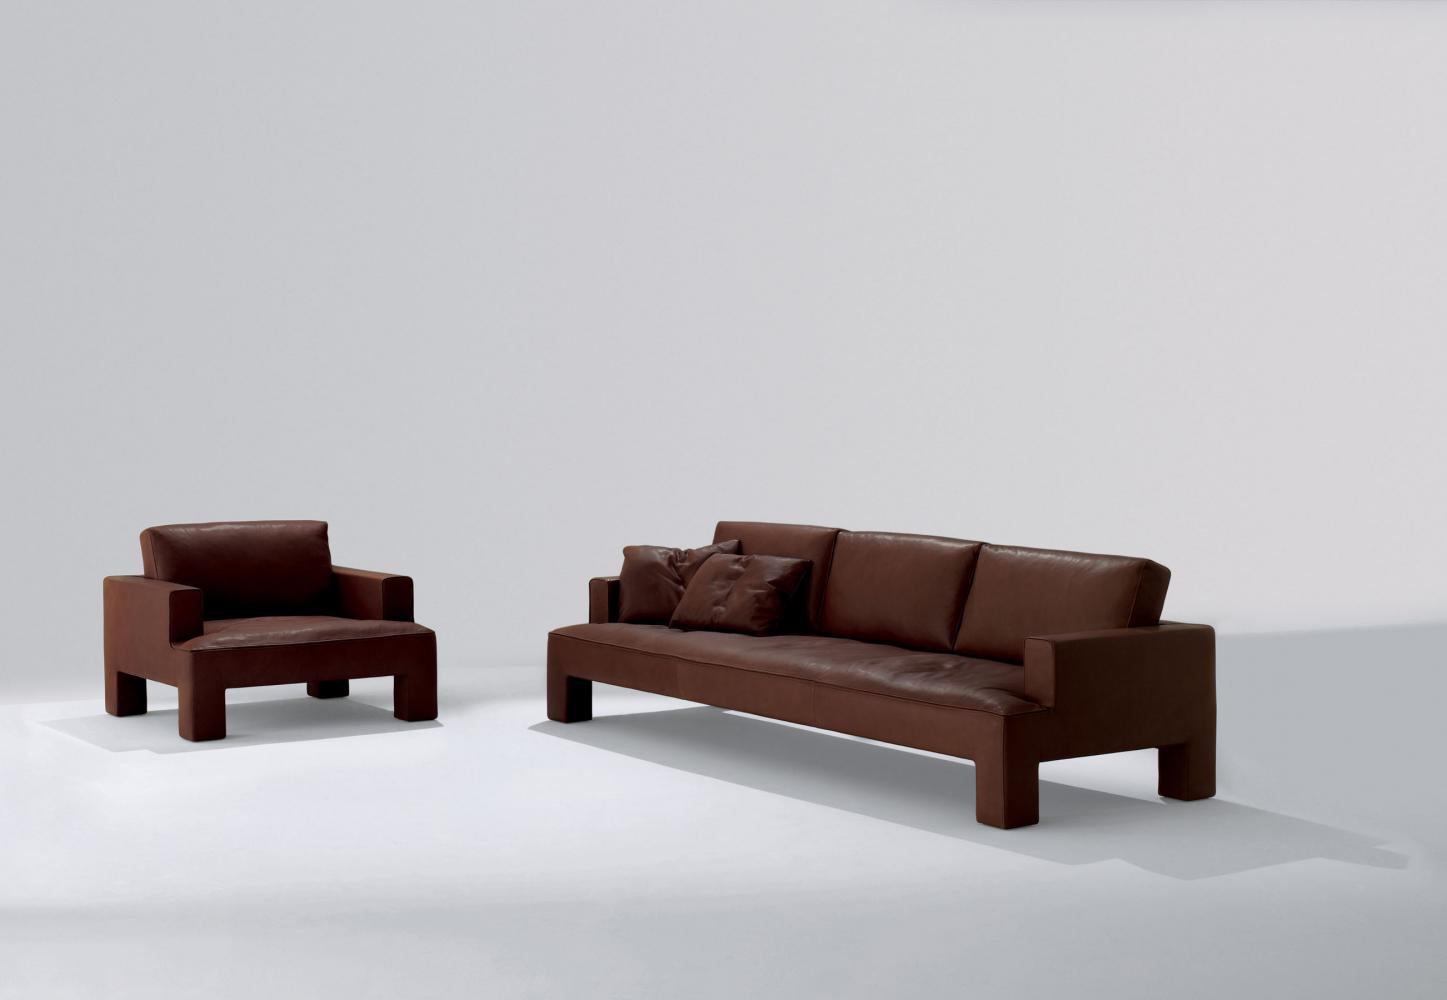 Two and three seater modern luxury sofa in leather or fabric